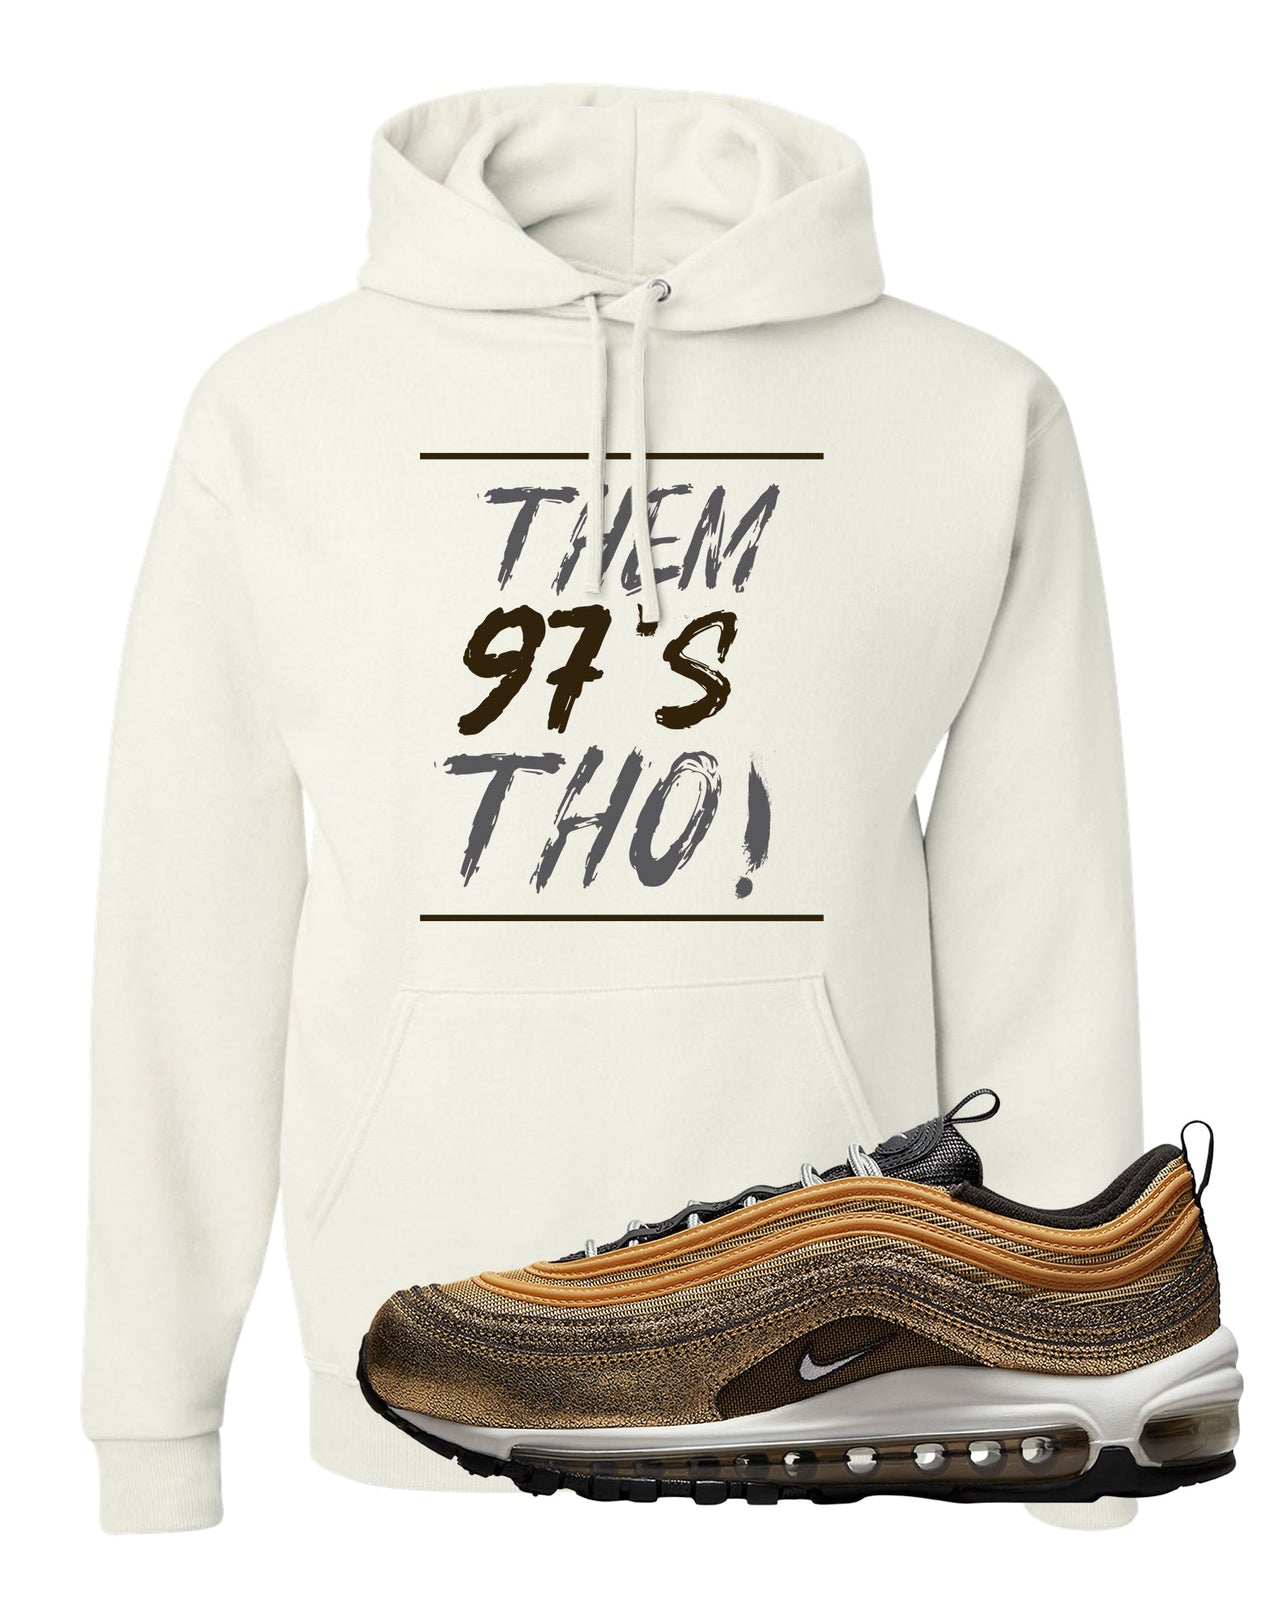 Golden Gals 97s Hoodie | Them 97's Tho, White